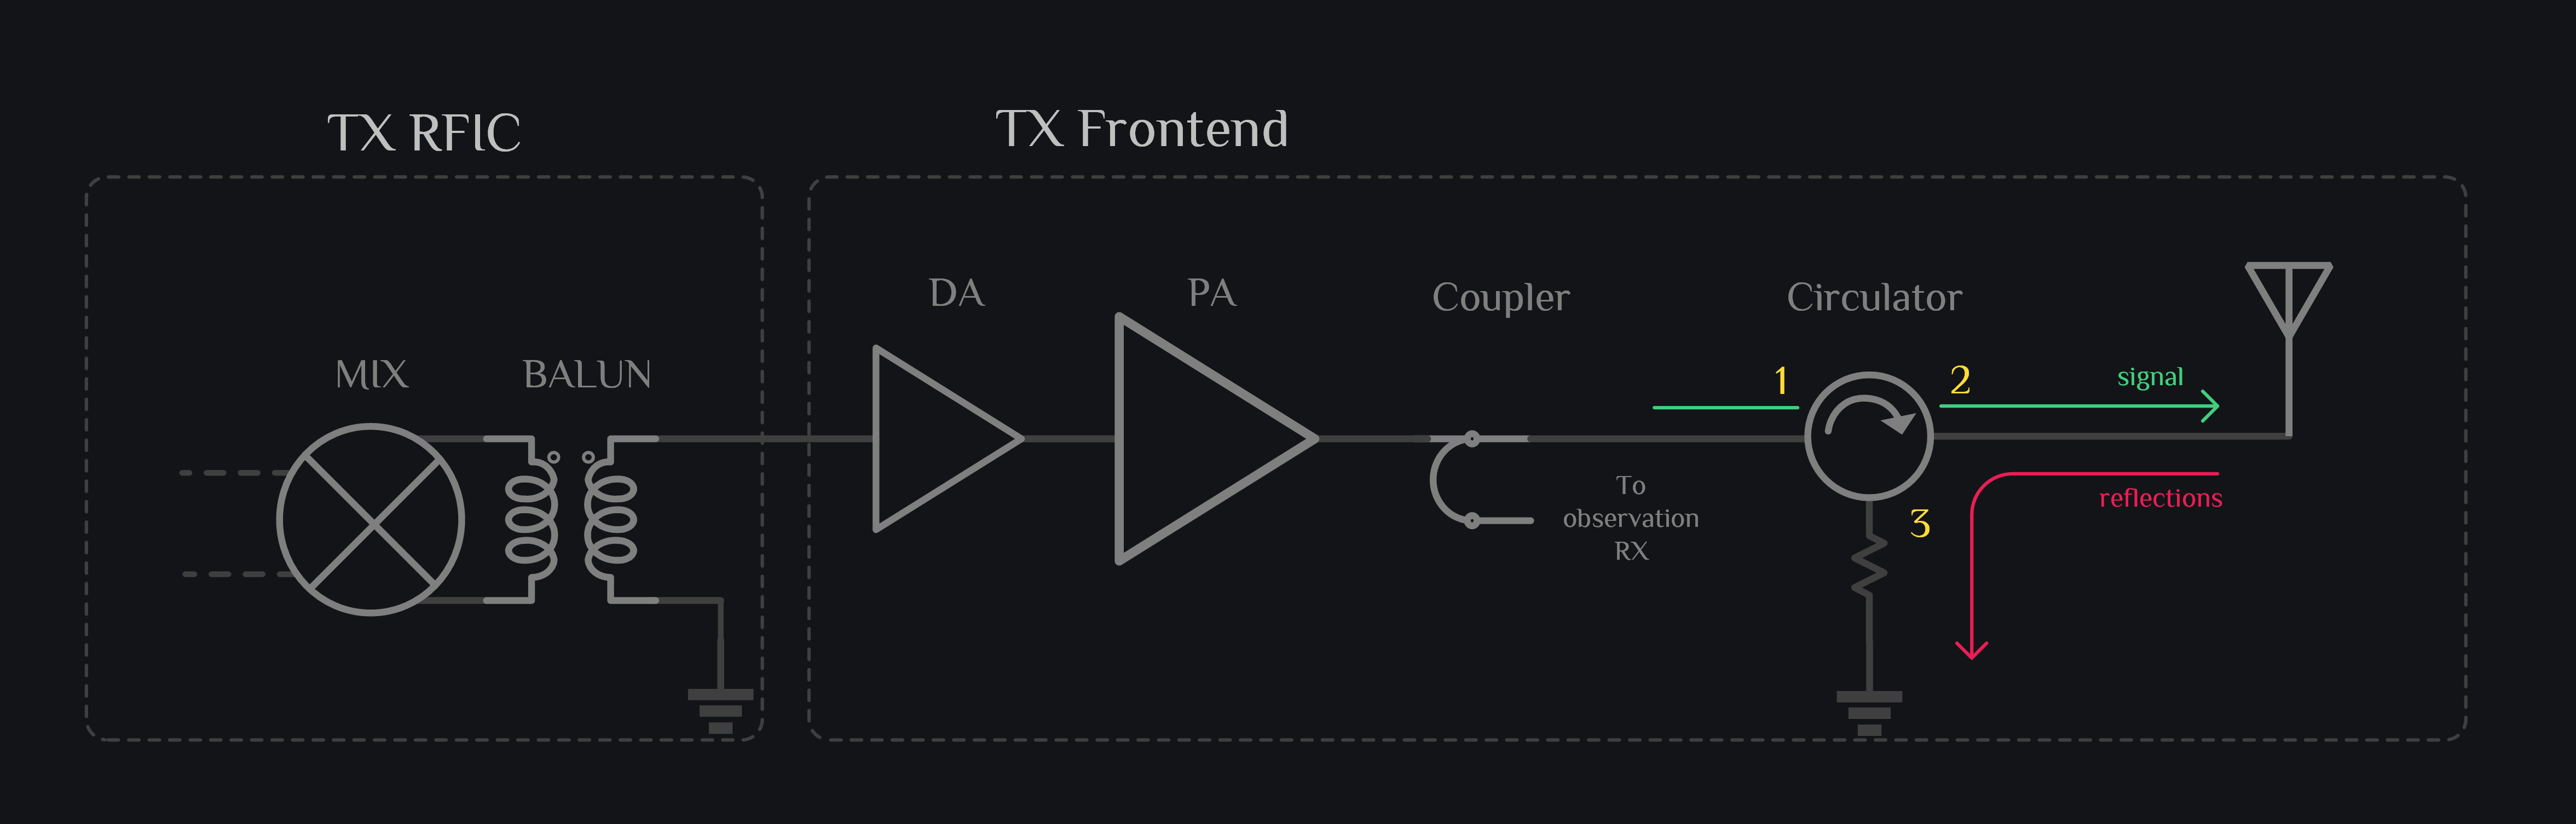 TX RFIC and TX Frontend Design